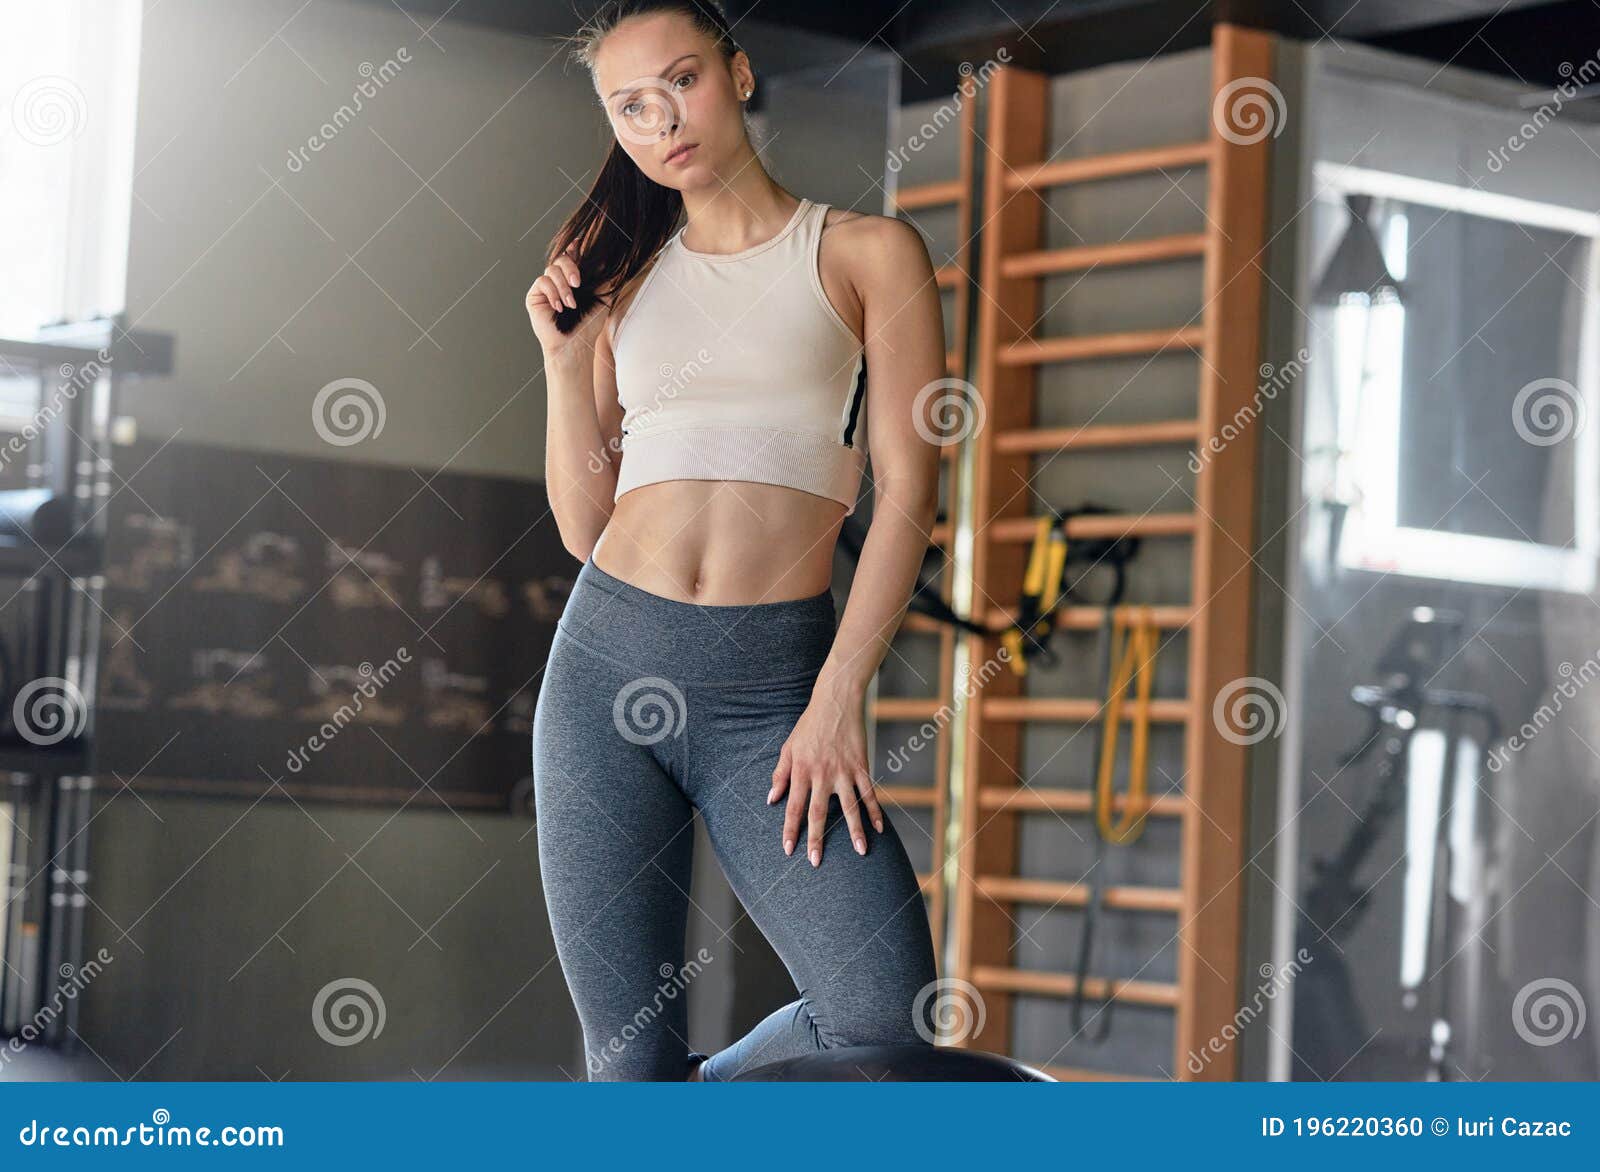 Fit Female Athlete In Activewear Ready To Doing Exercise With